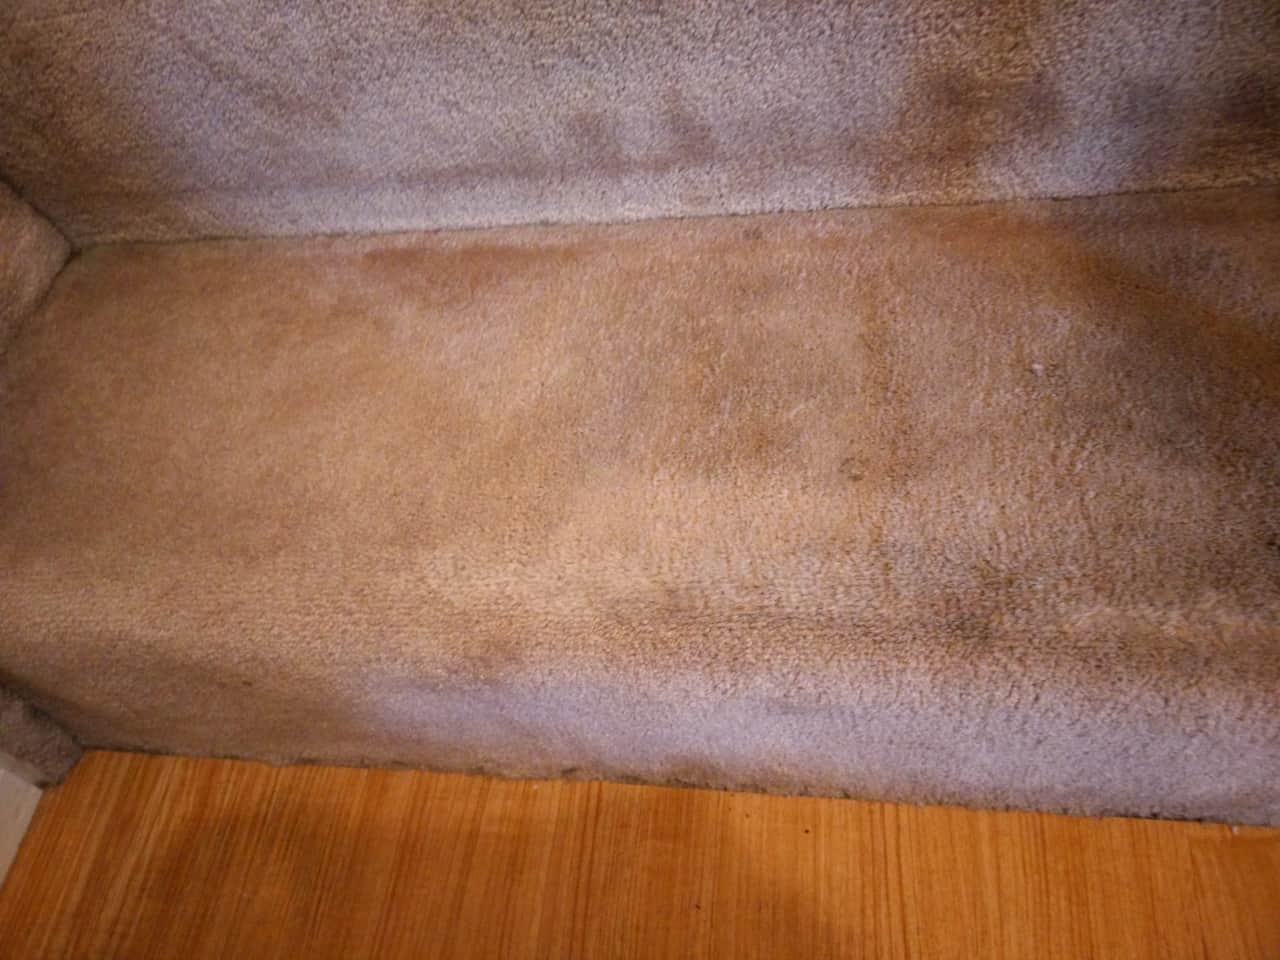 Dirty Stairs: After